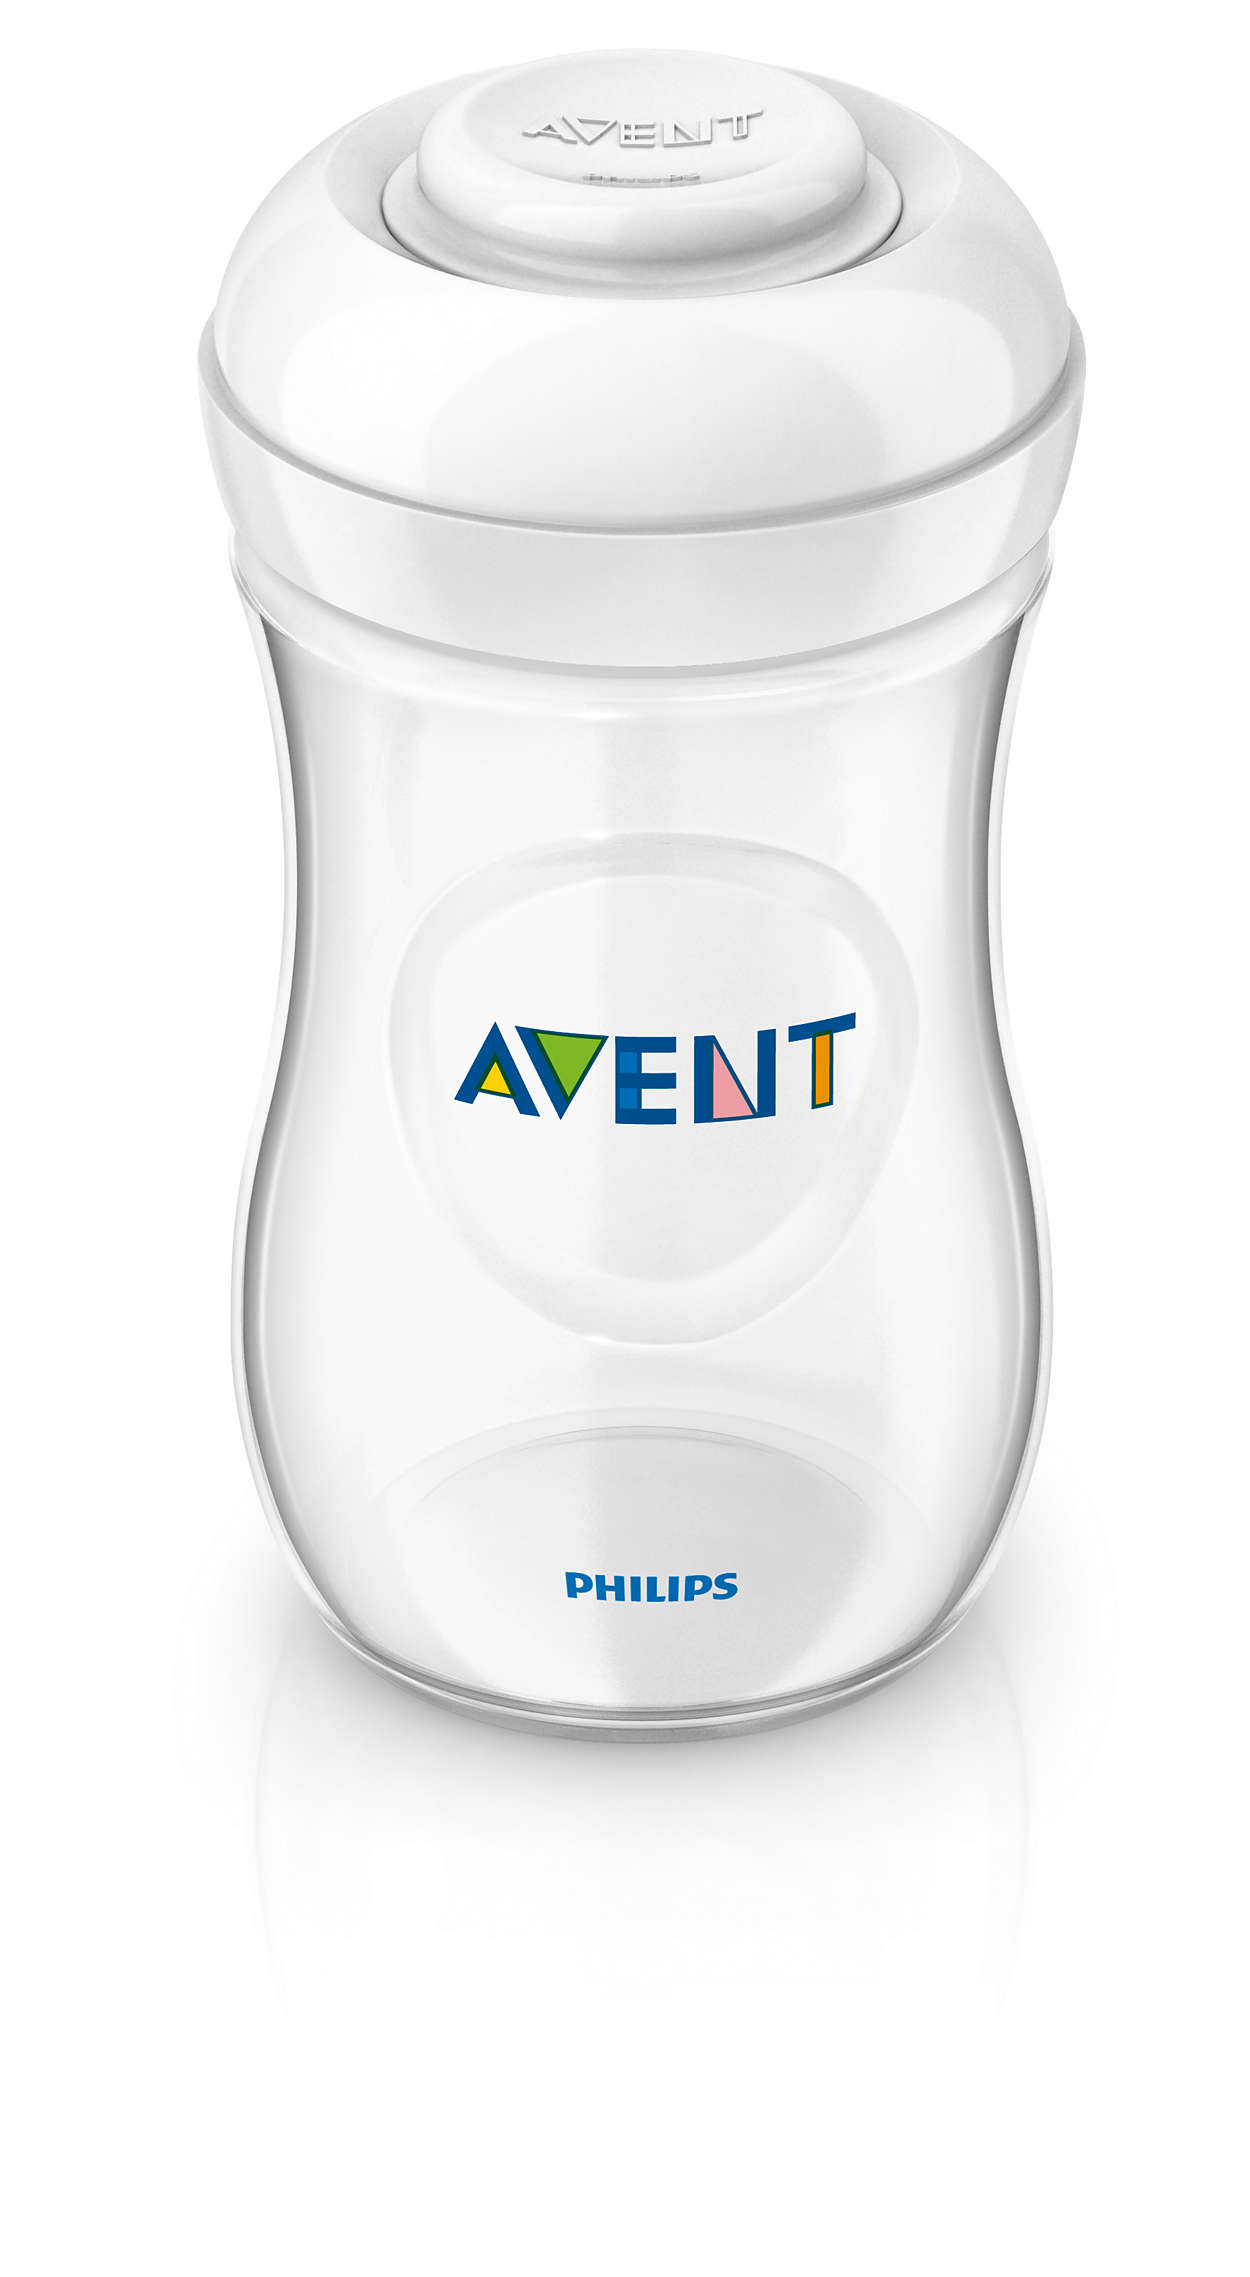 6 Pack Philips AVENT BPA Free Bottle Sealing Discs for Freezing Breast Milk New 